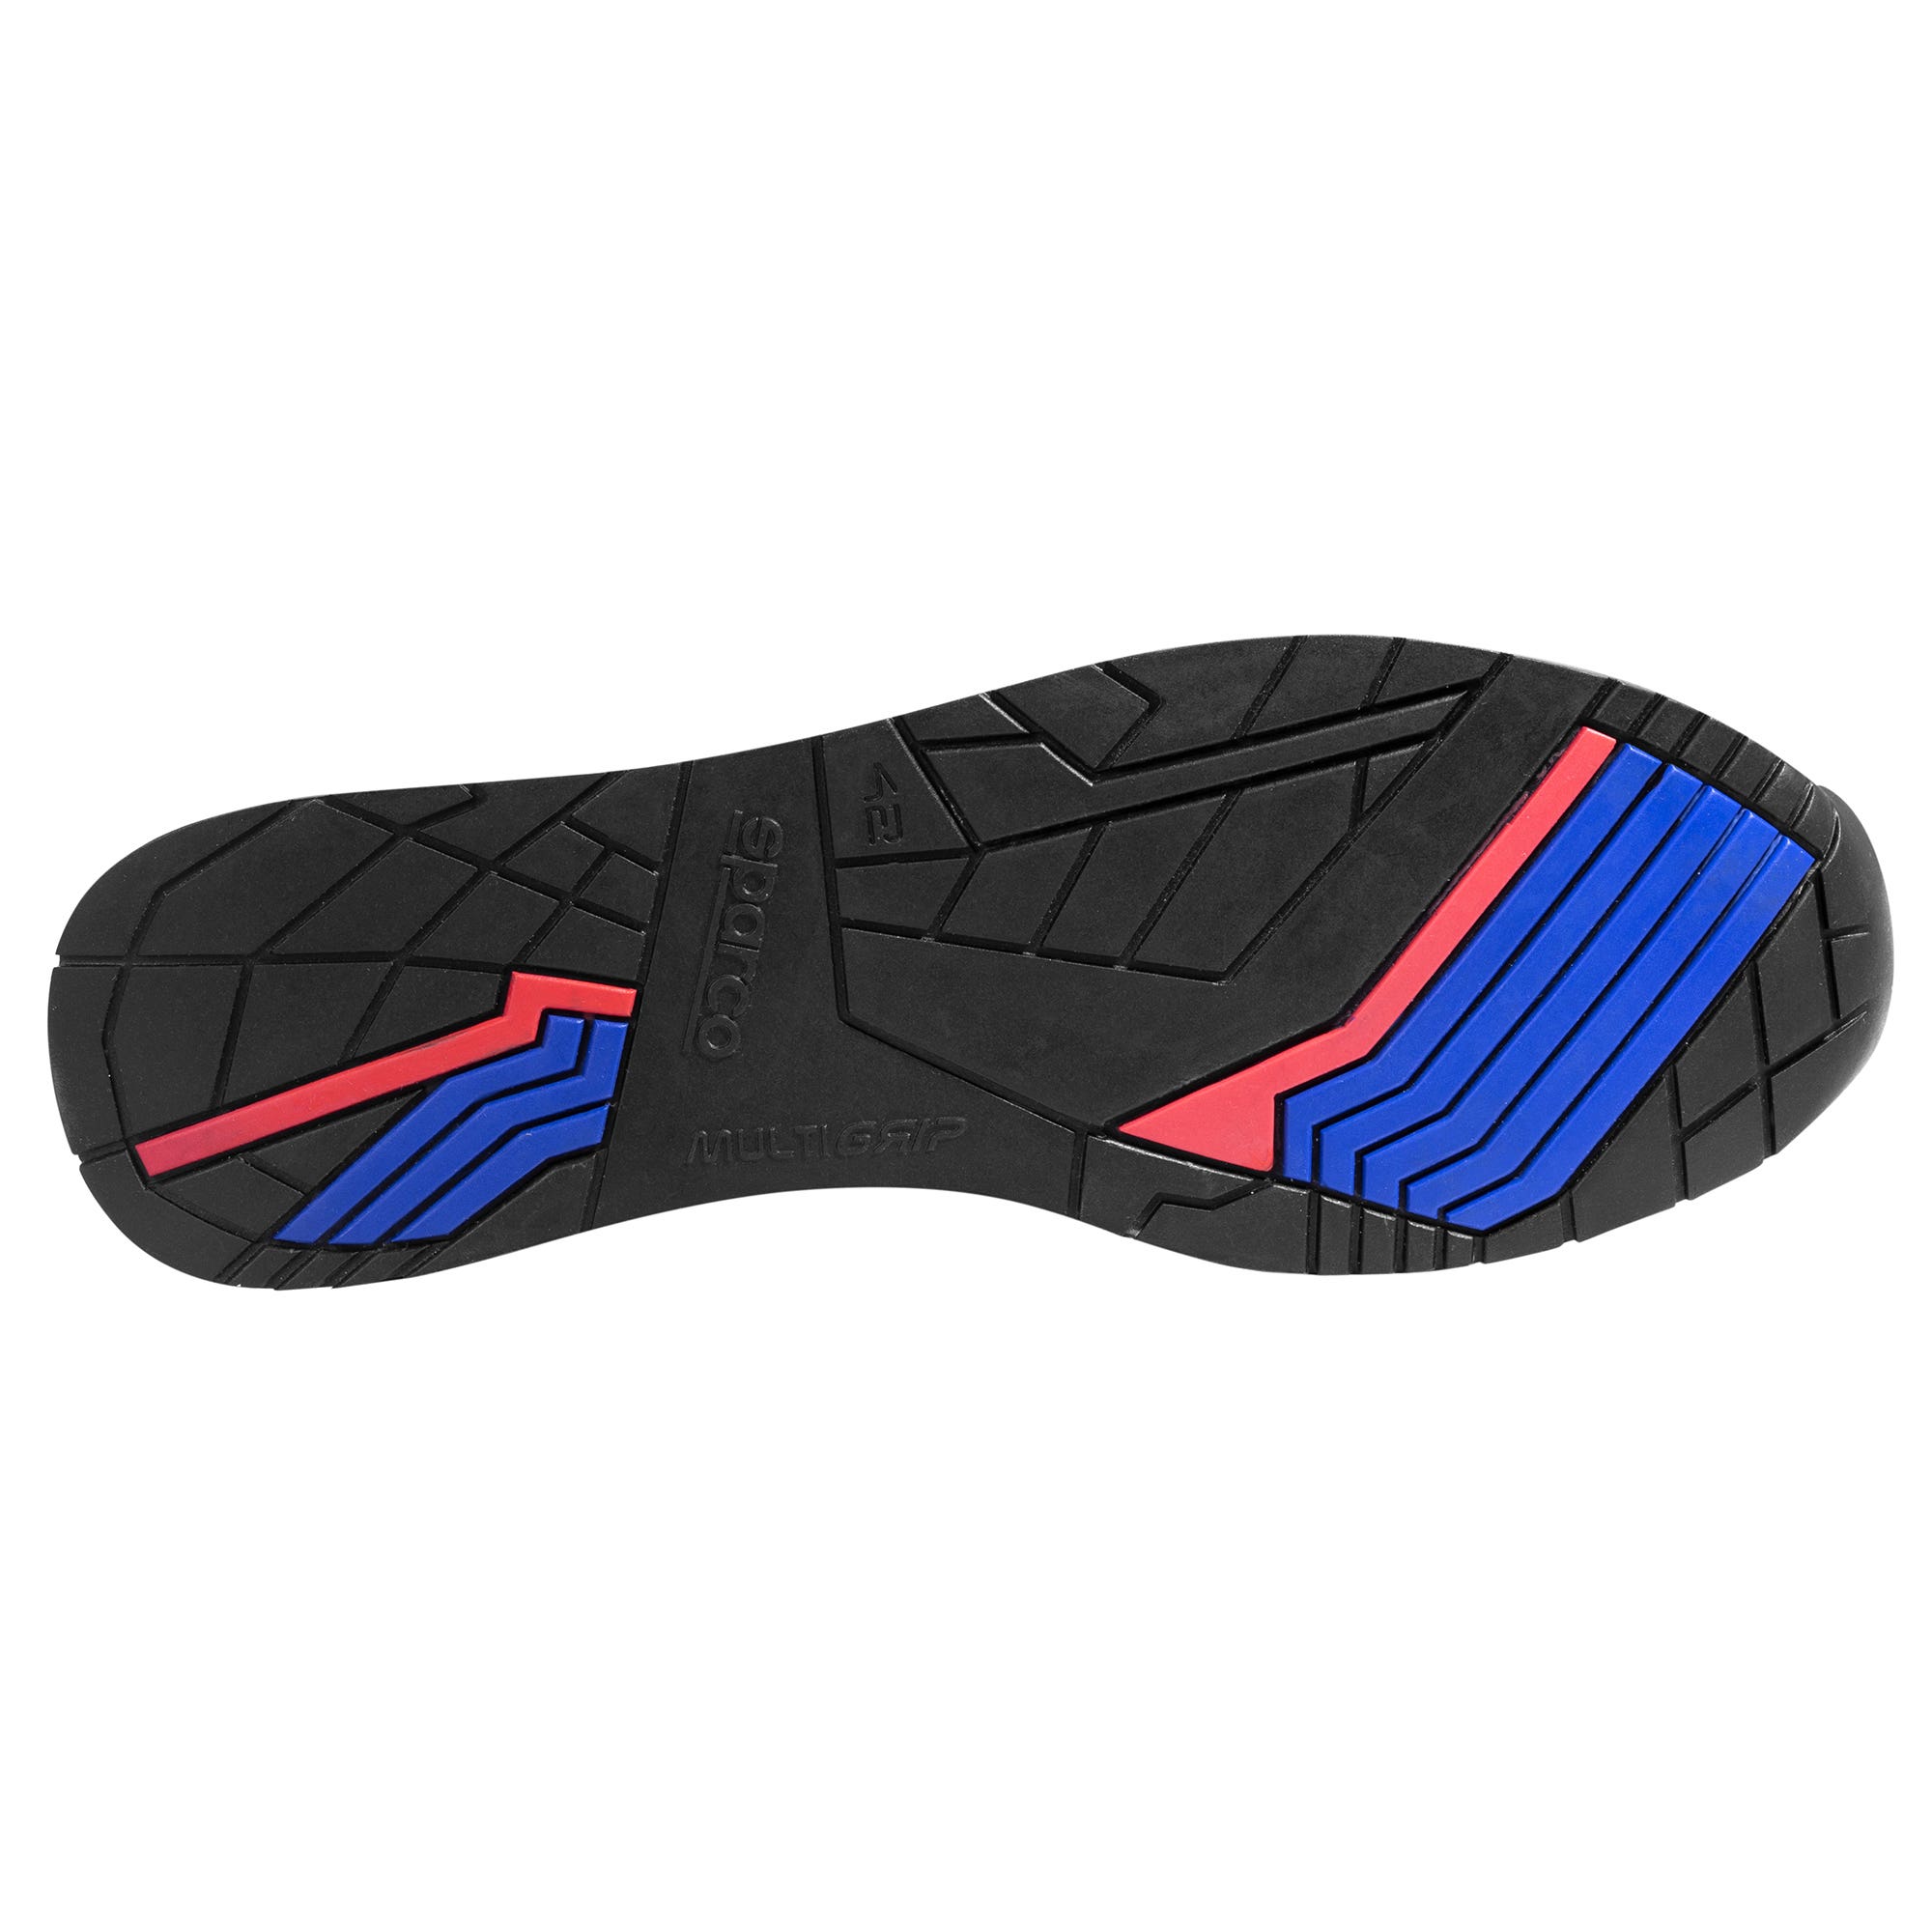 GYMKHANA ESD S3 MARTINI RACING (SAFETY SHOES) - Sparco Shop